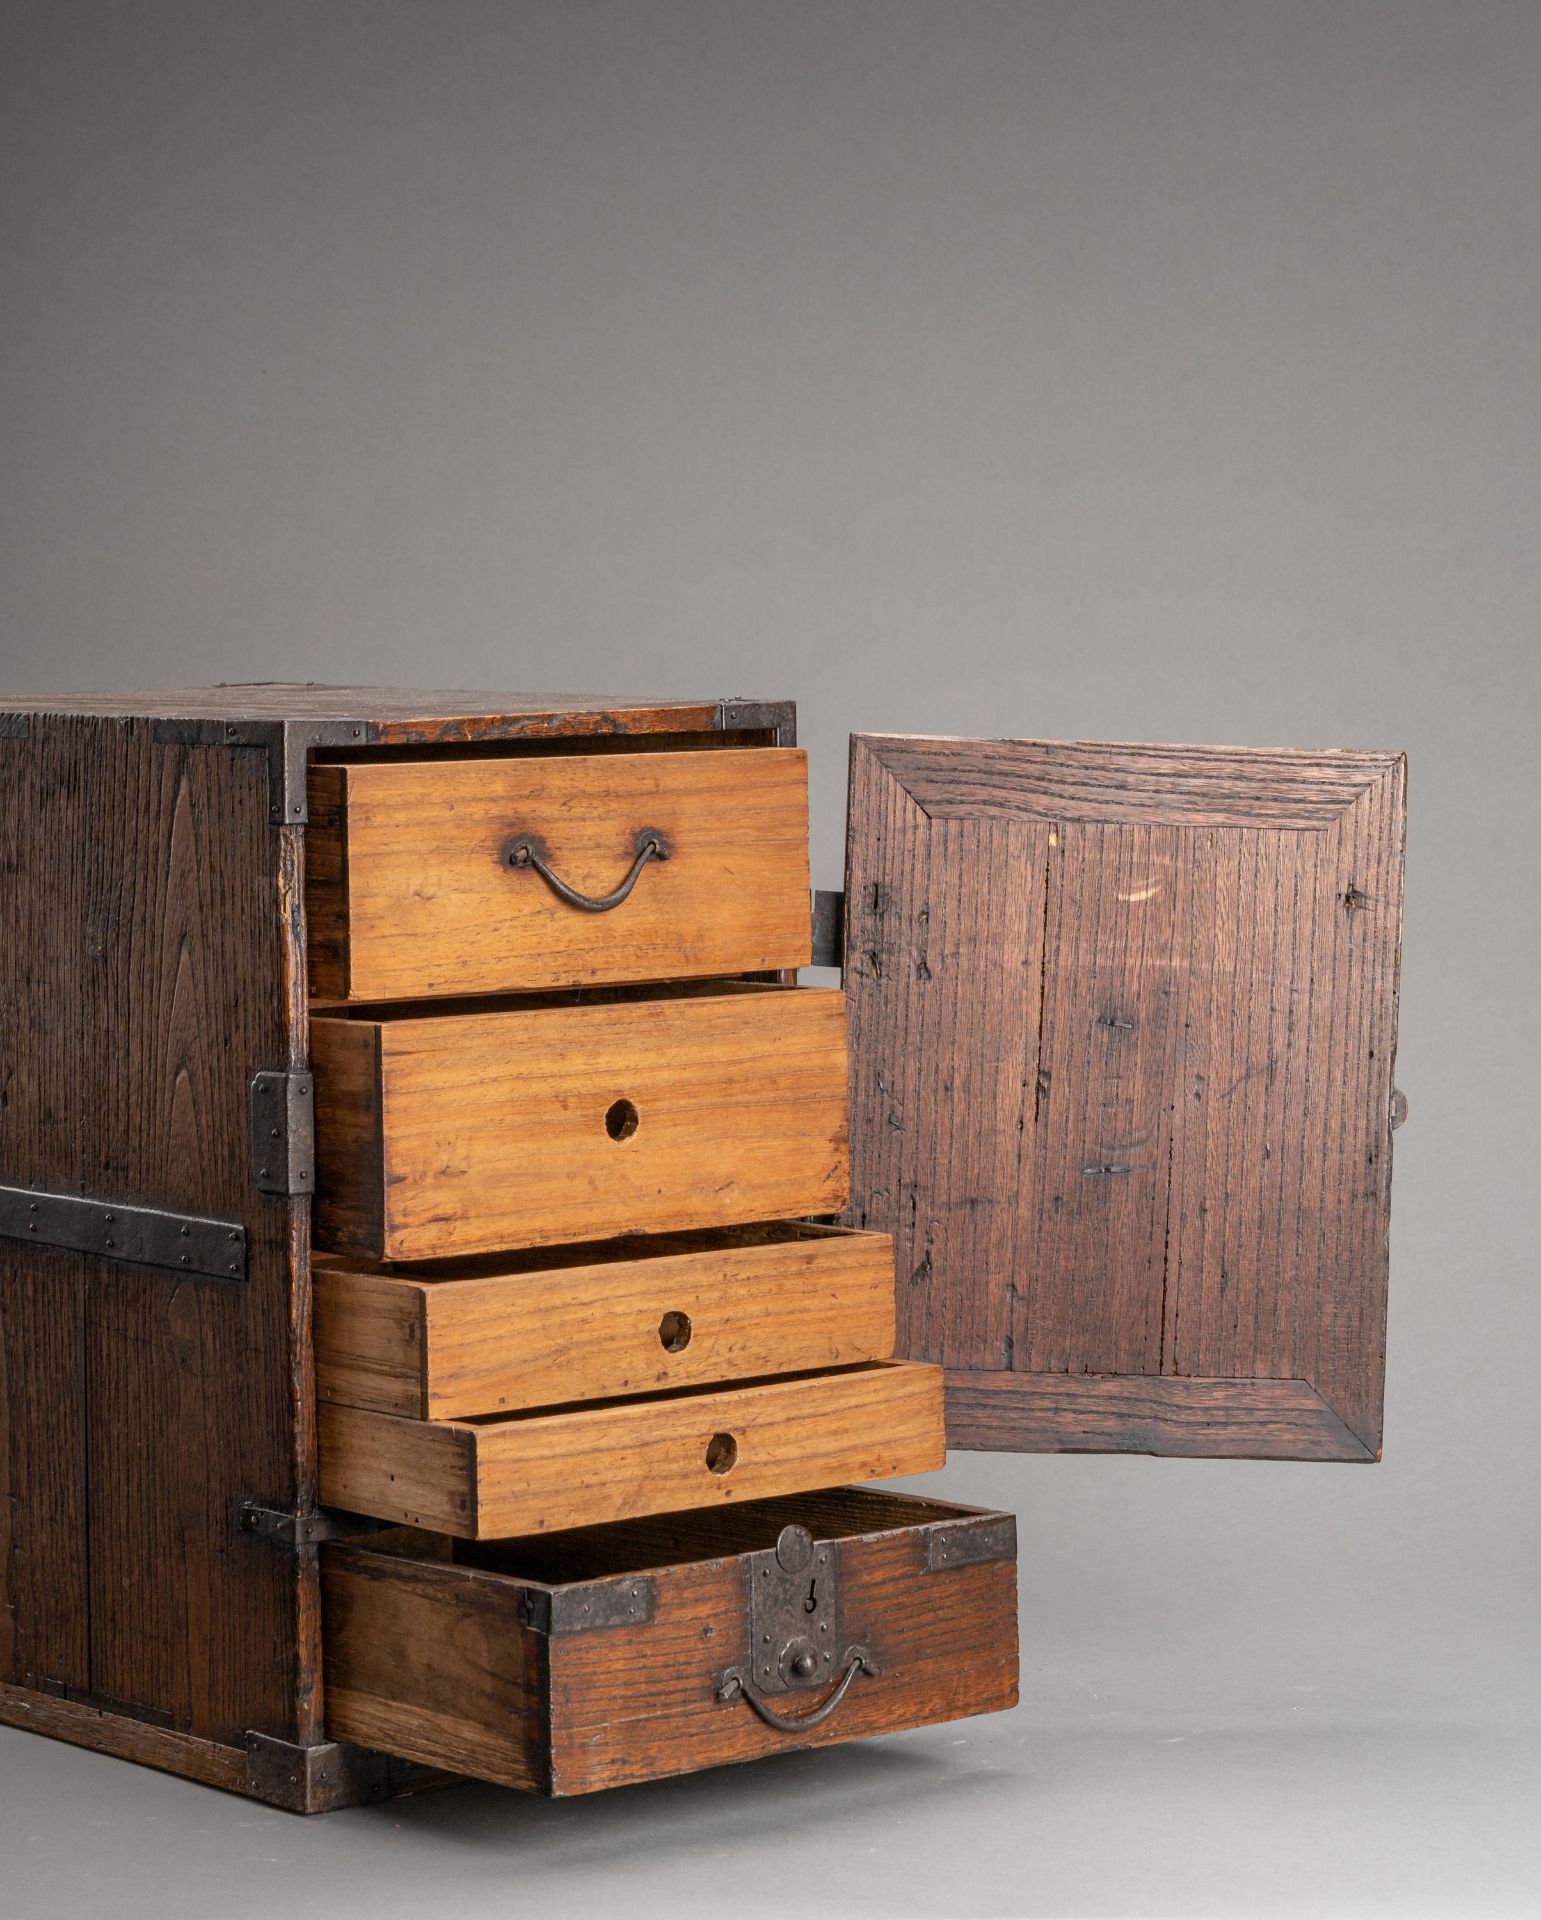 A WOODEN TANSU CHEST WITH 5 DRAWERS, EDO - Image 2 of 7